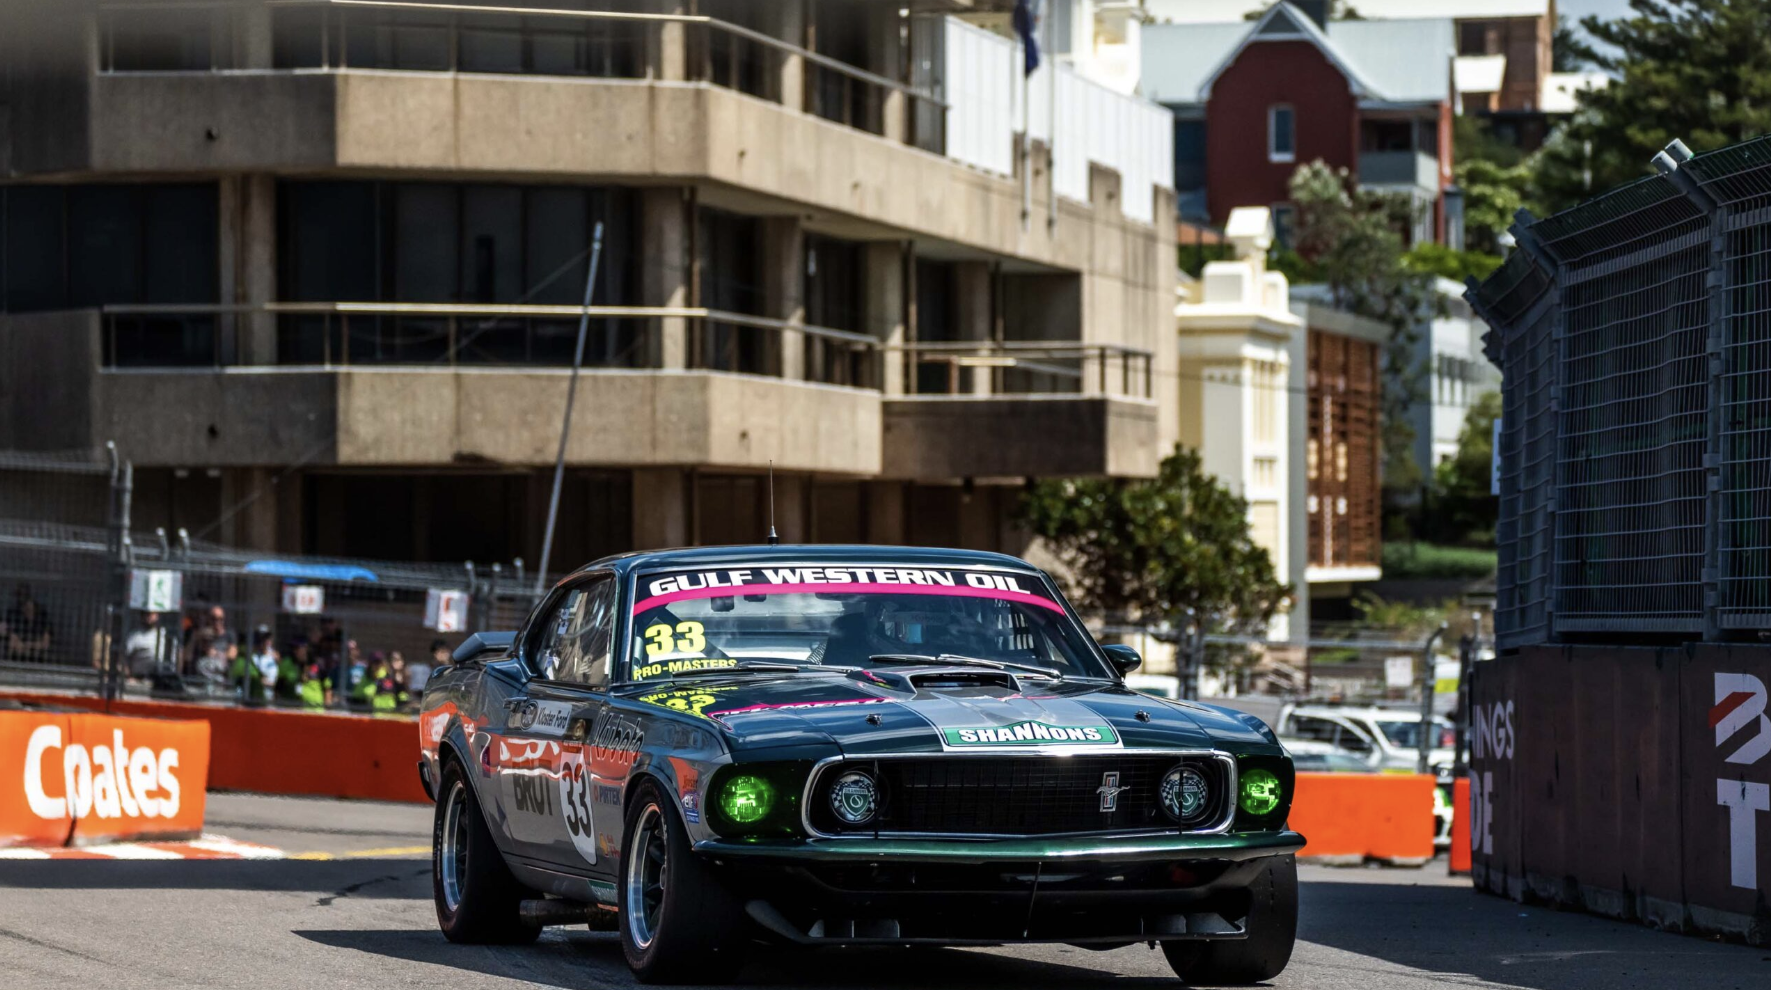 JOHNSON DOUBLE EDGES MUSTANG CLOSER TO TCM HISTORY